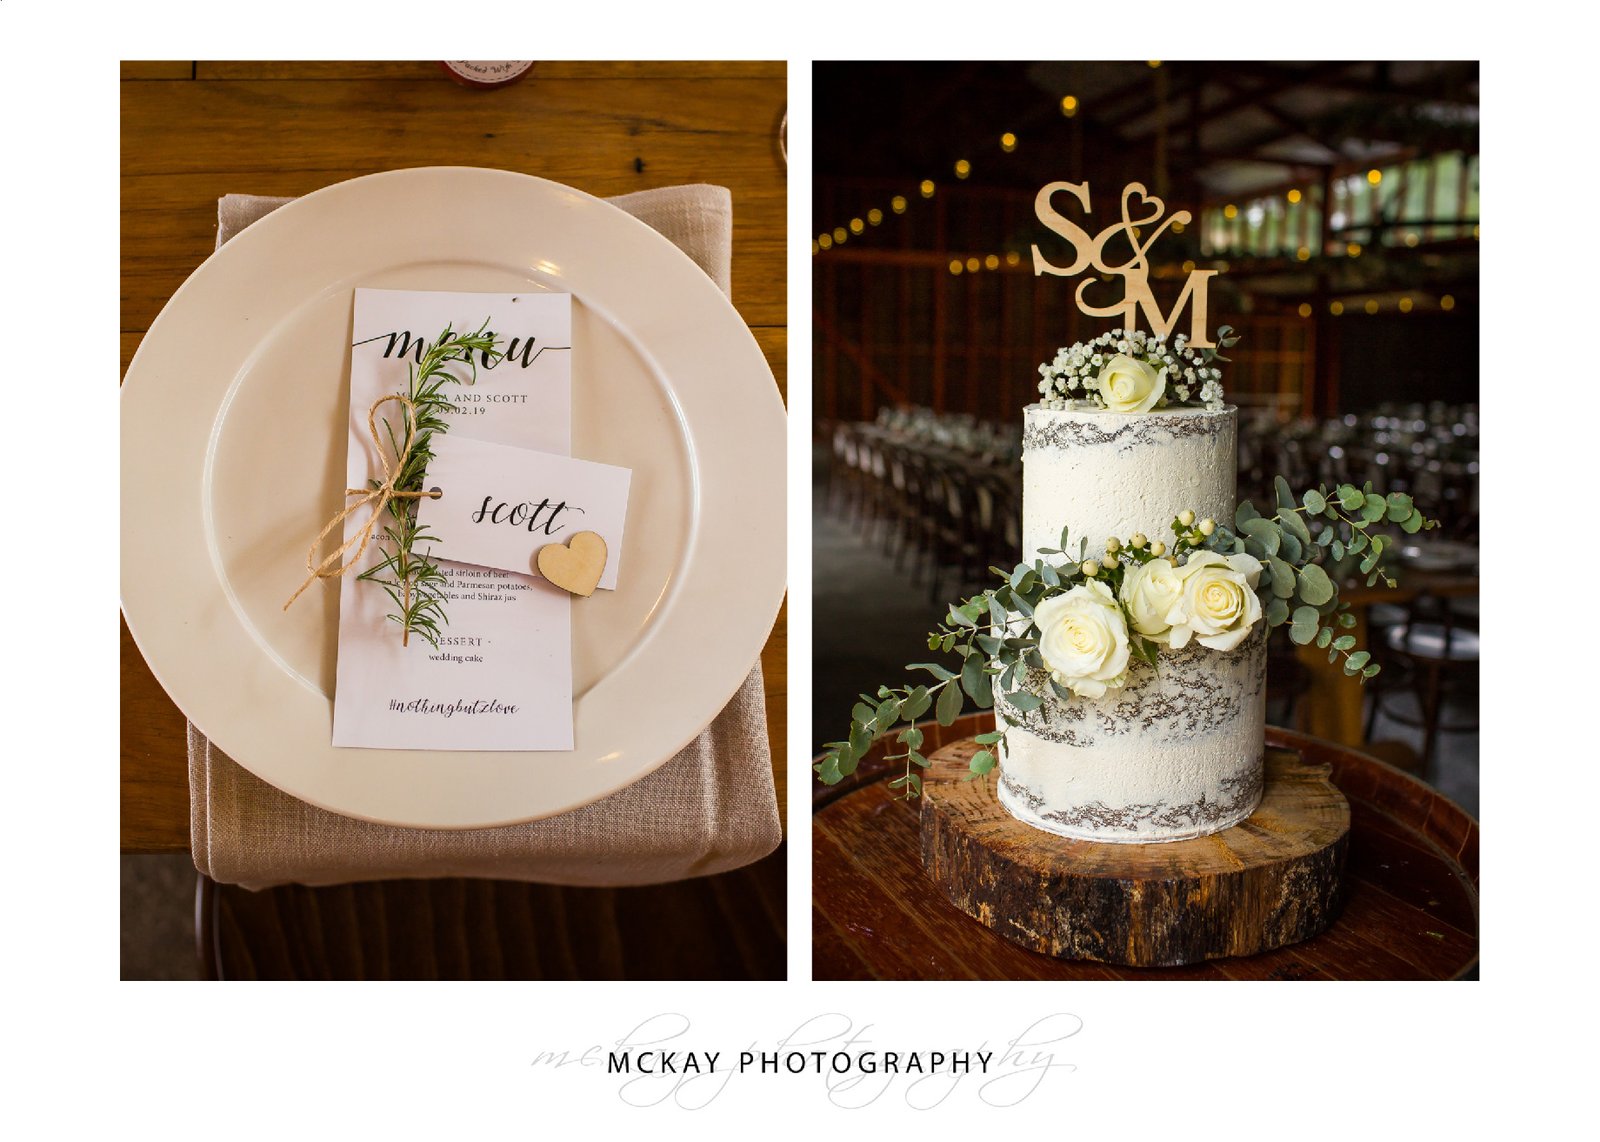 Wedding cake and table setting details